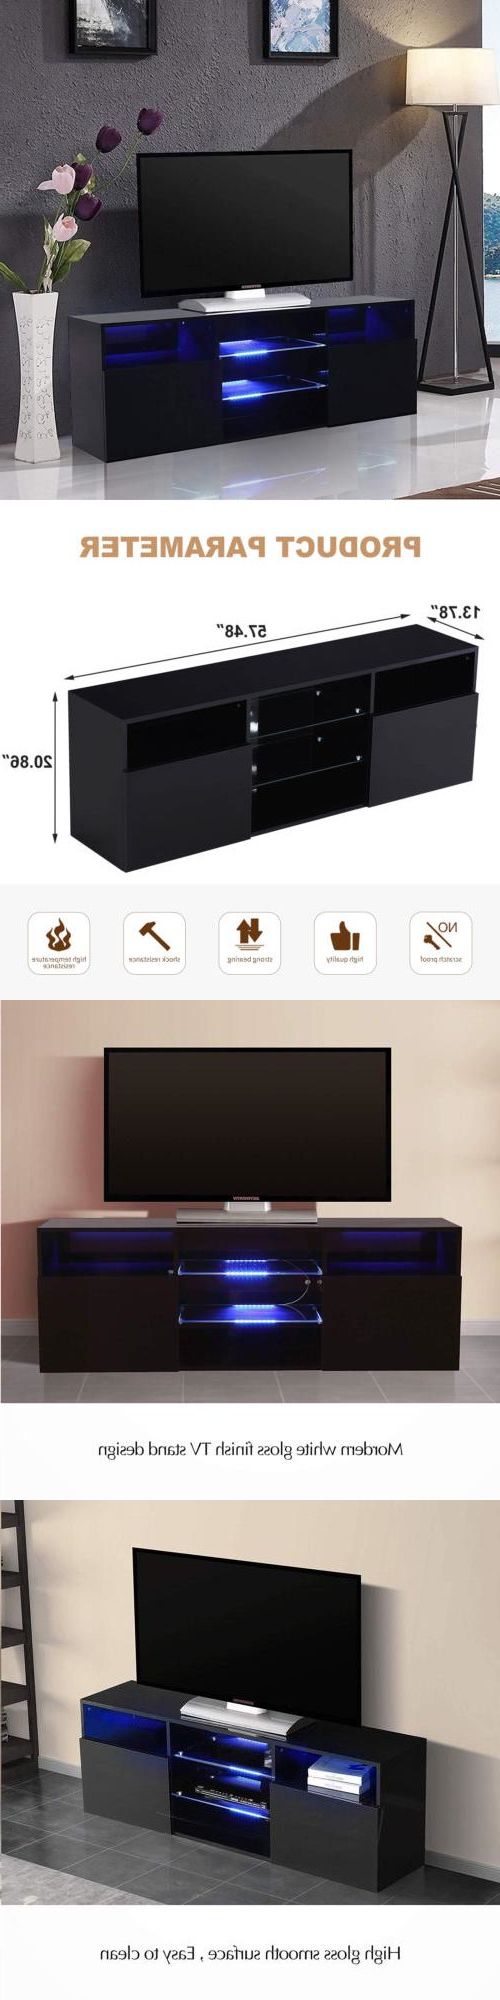 High Gloss Black Led Tv Stand Unit Cabinet 2 Shelves 2 In 47" Tv Stands High Gloss Tv Cabinet With 2 Drawers (View 11 of 20)